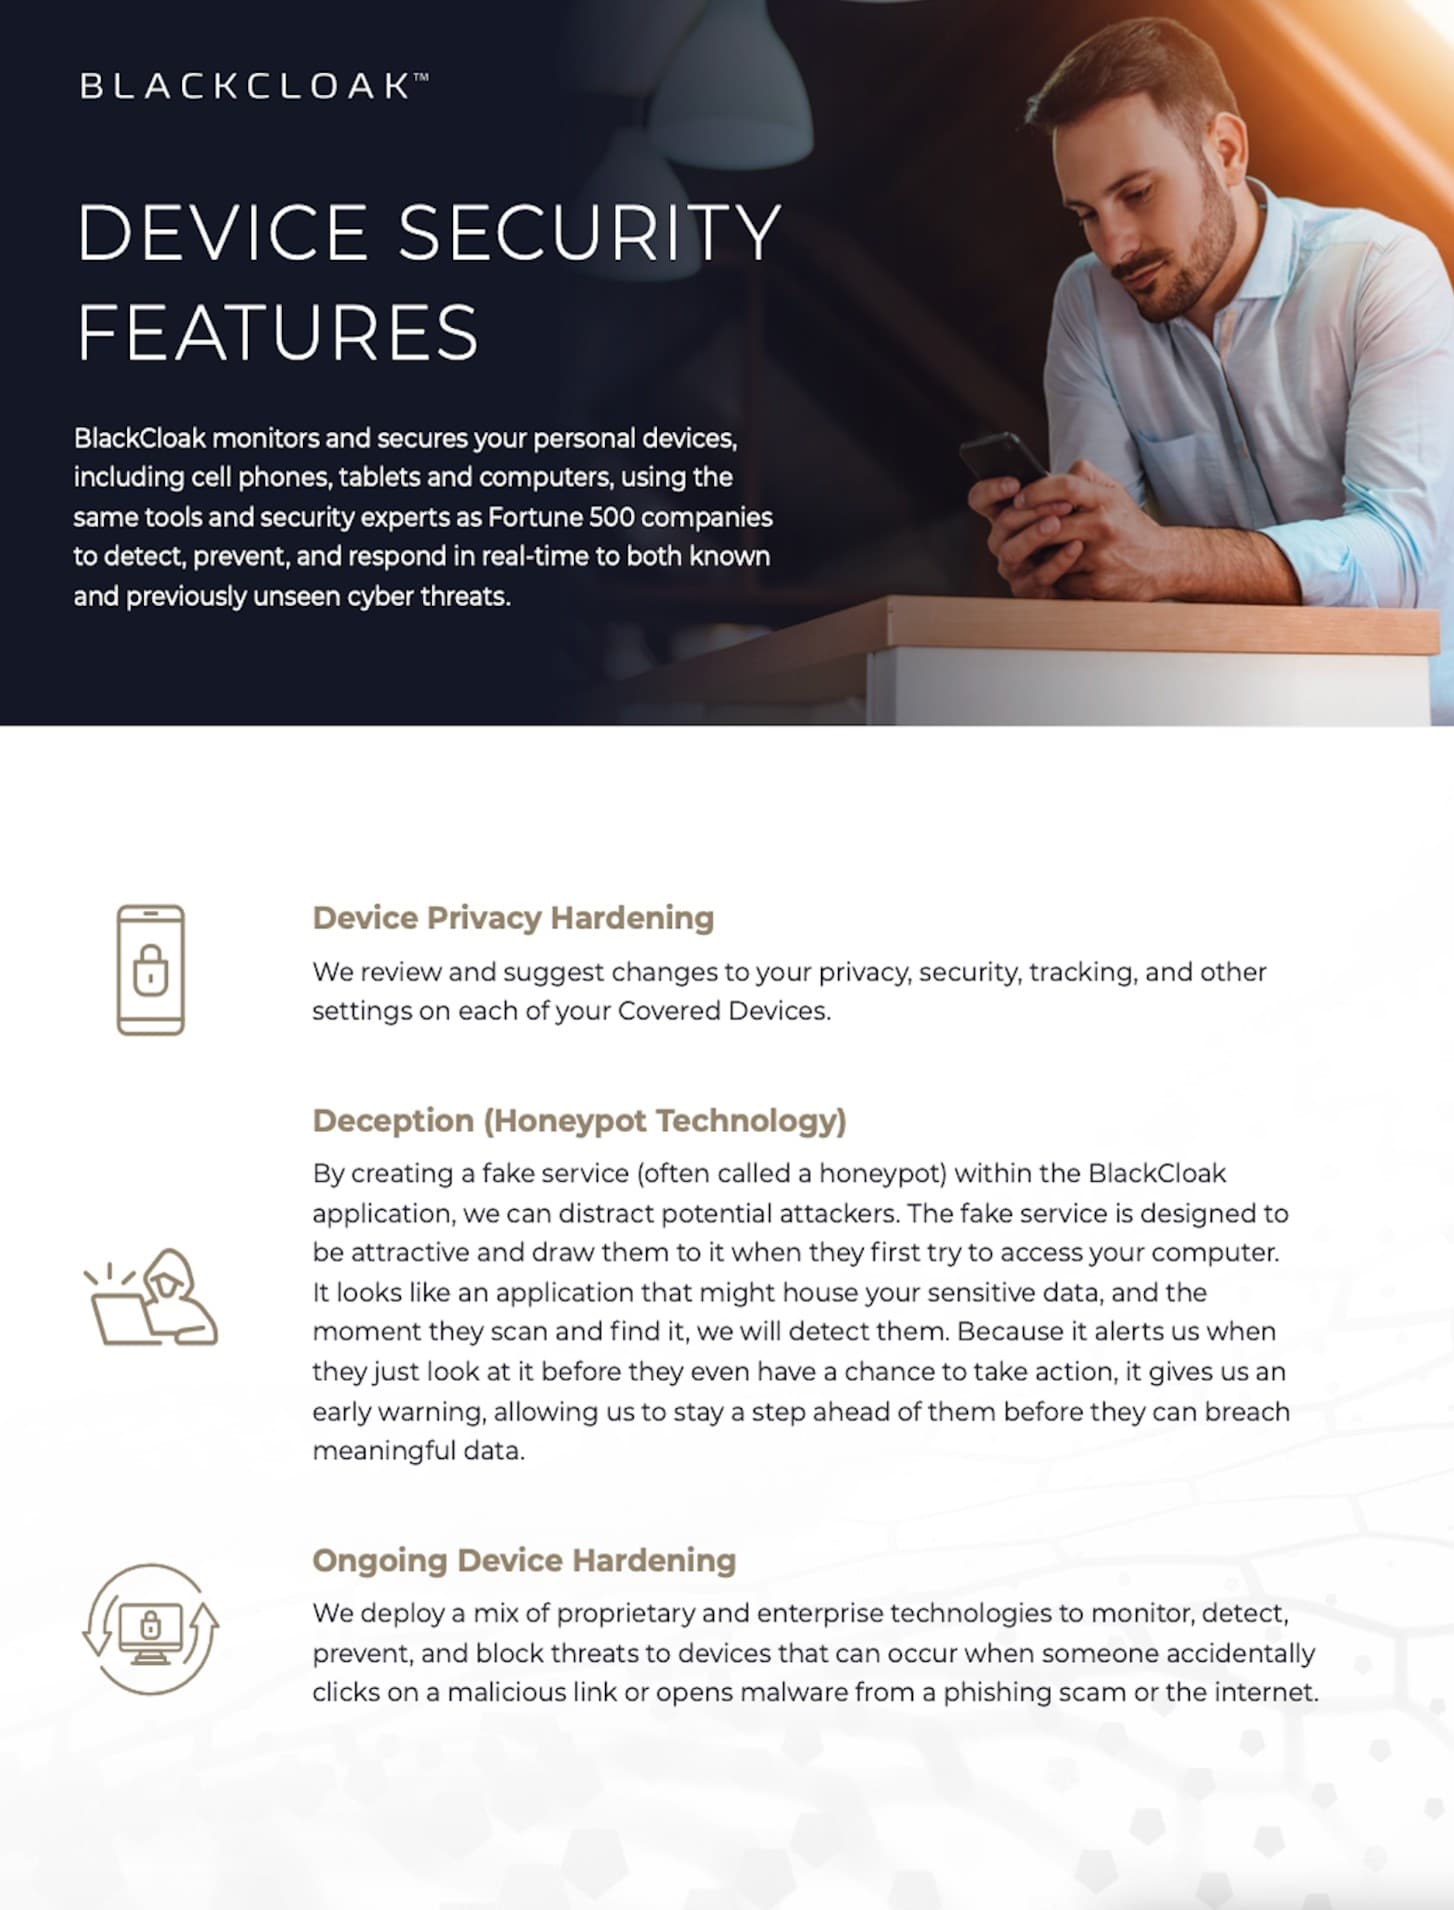 Device security features